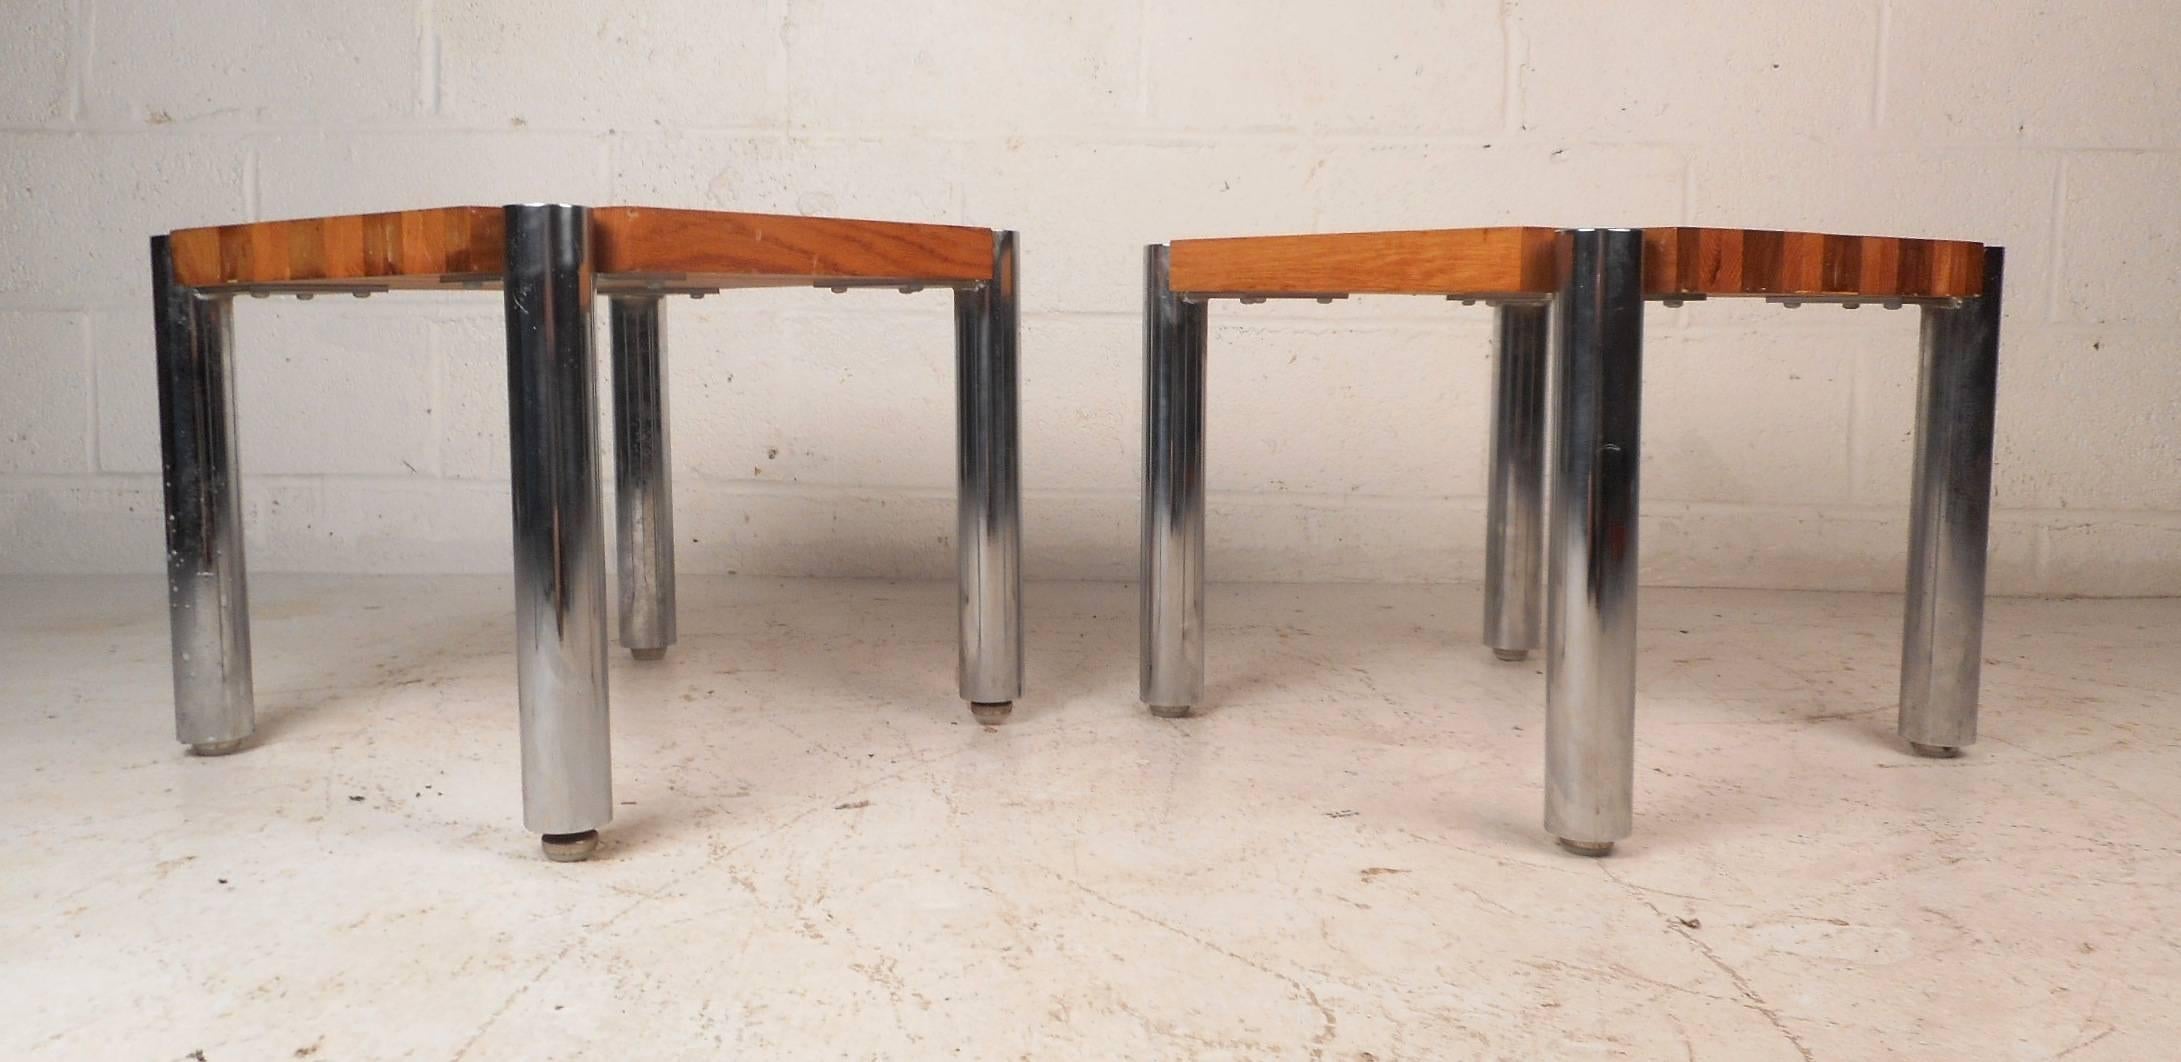 This gorgeous pair of vintage modern end tables feature a wonderful two-tone design with lovely teak wood grain. These unique pieces have large cylindrical chrome legs ensuring sturdiness and style. These stunning midcentury end tables make the